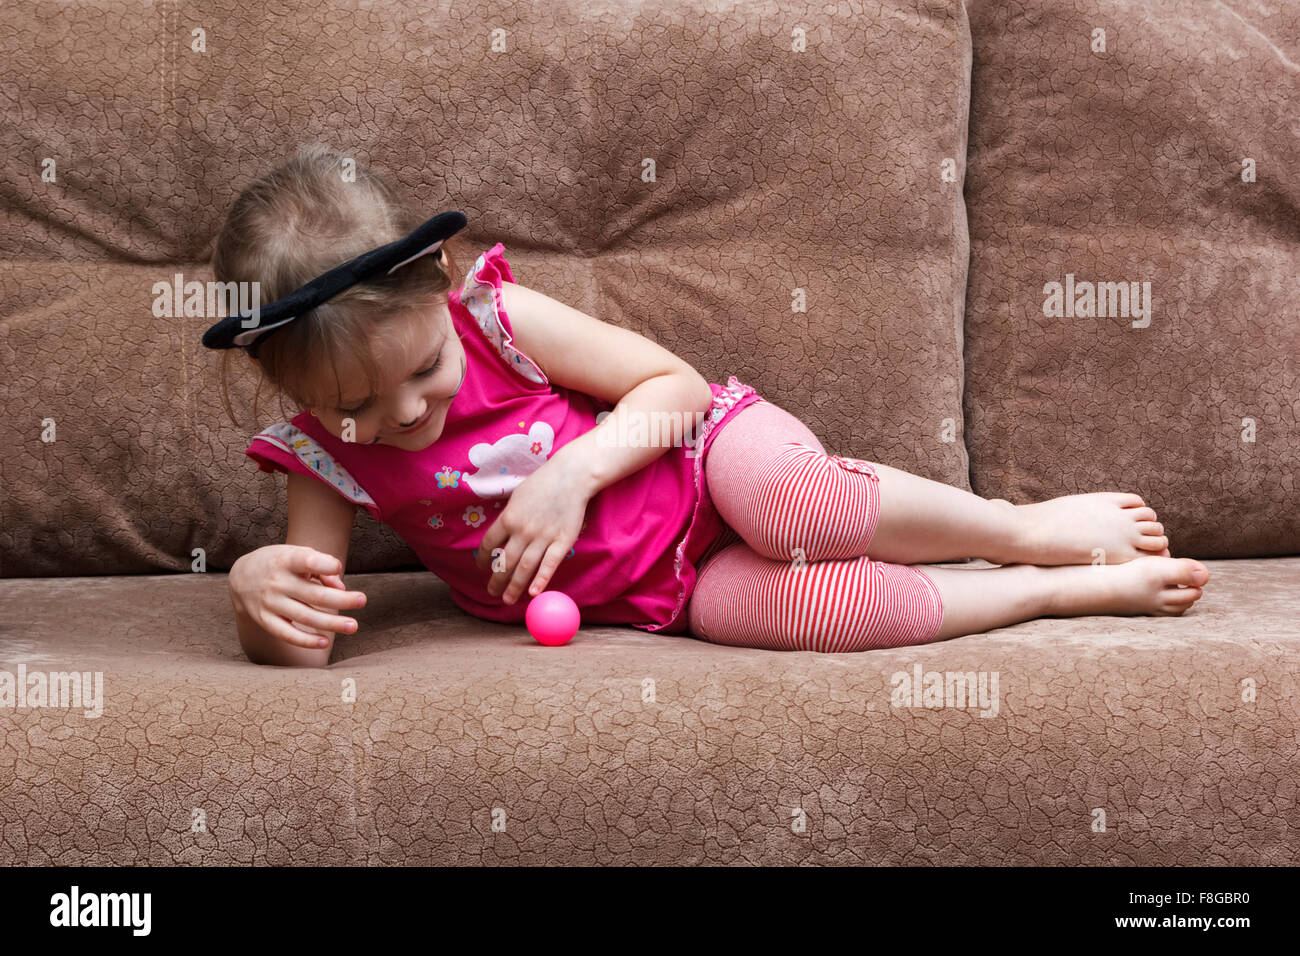 little girl with cat face painting play ball on a couch Stock Photo